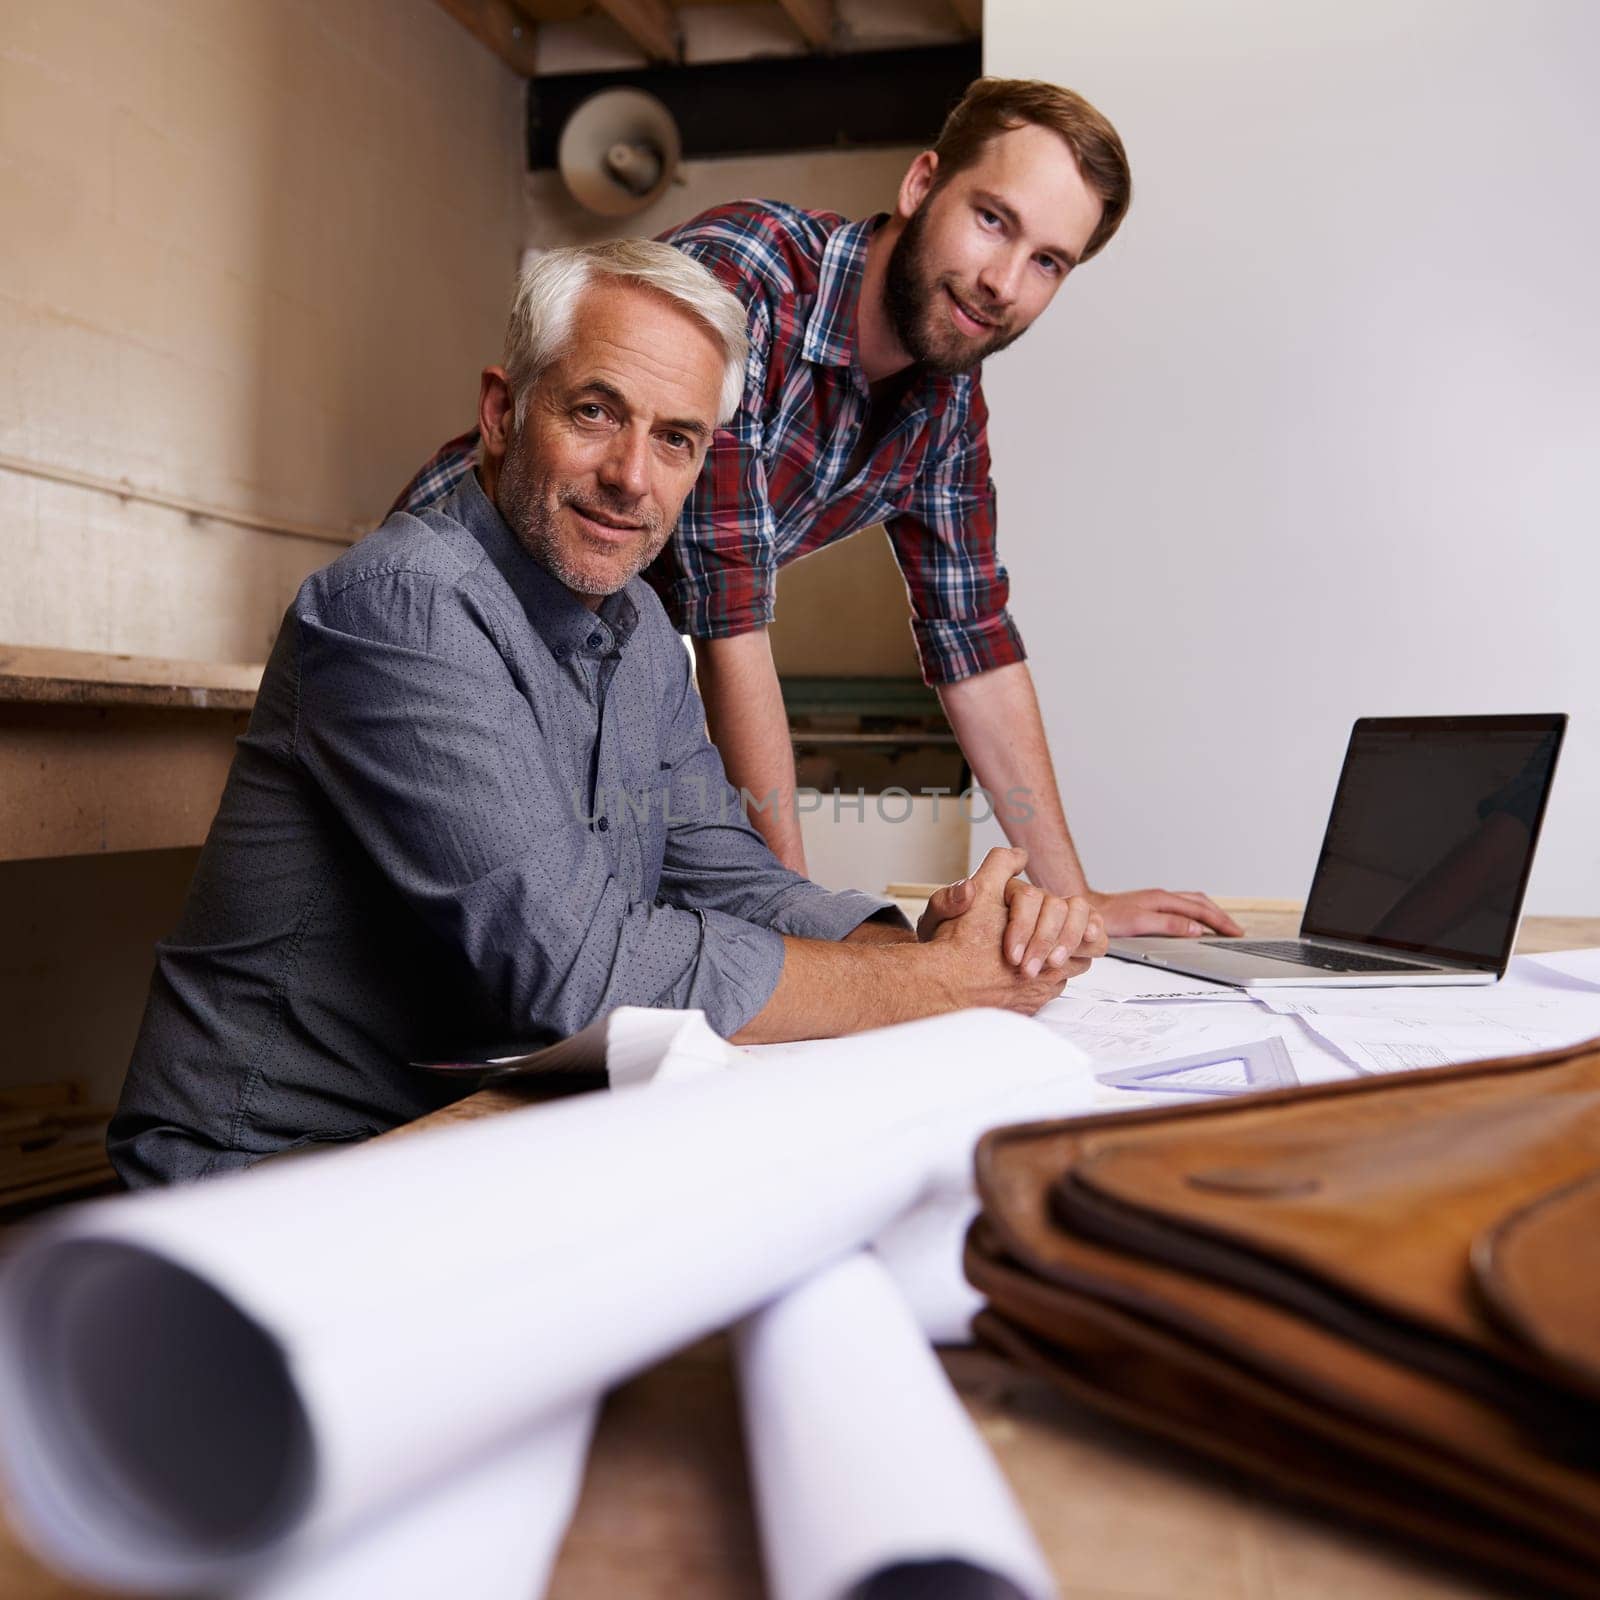 Portrait, men and architecture with blueprint, laptop and teamwork for property development and carpenter. Face, people and entrepreneur with documents and startup with apprentice, industry or mentor.